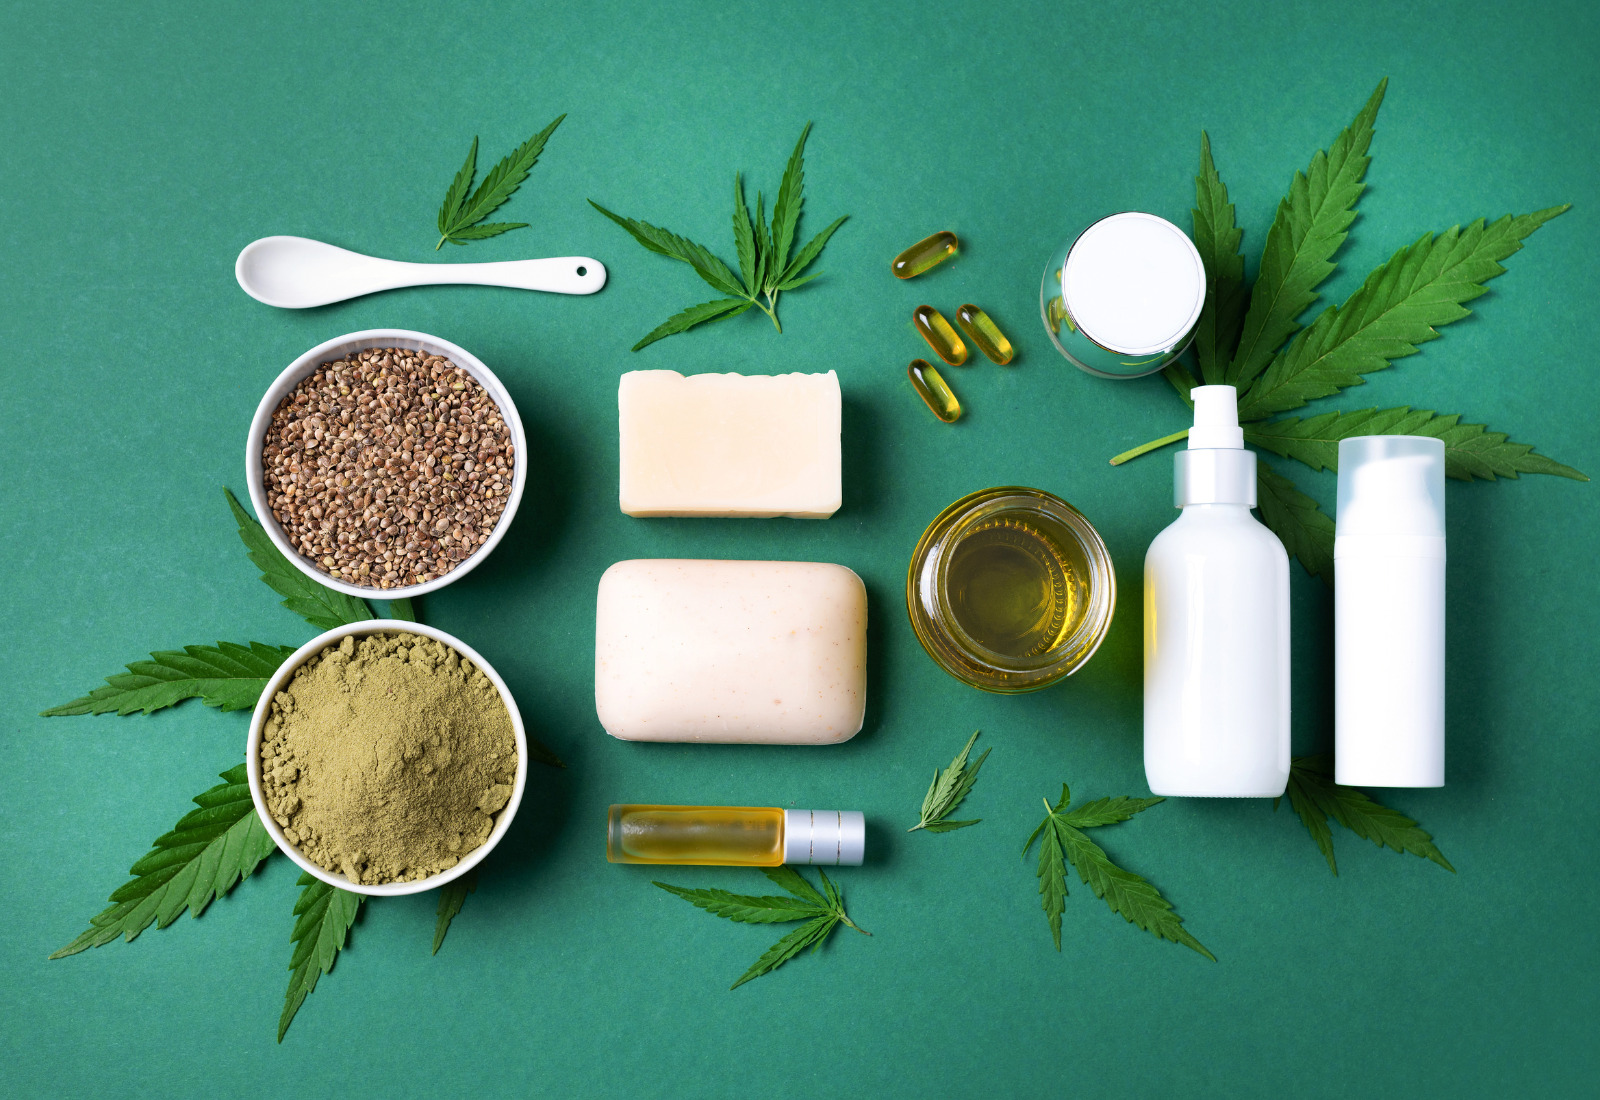 Intoxicating Hemp Product Laws are More Complicated Than They Seem